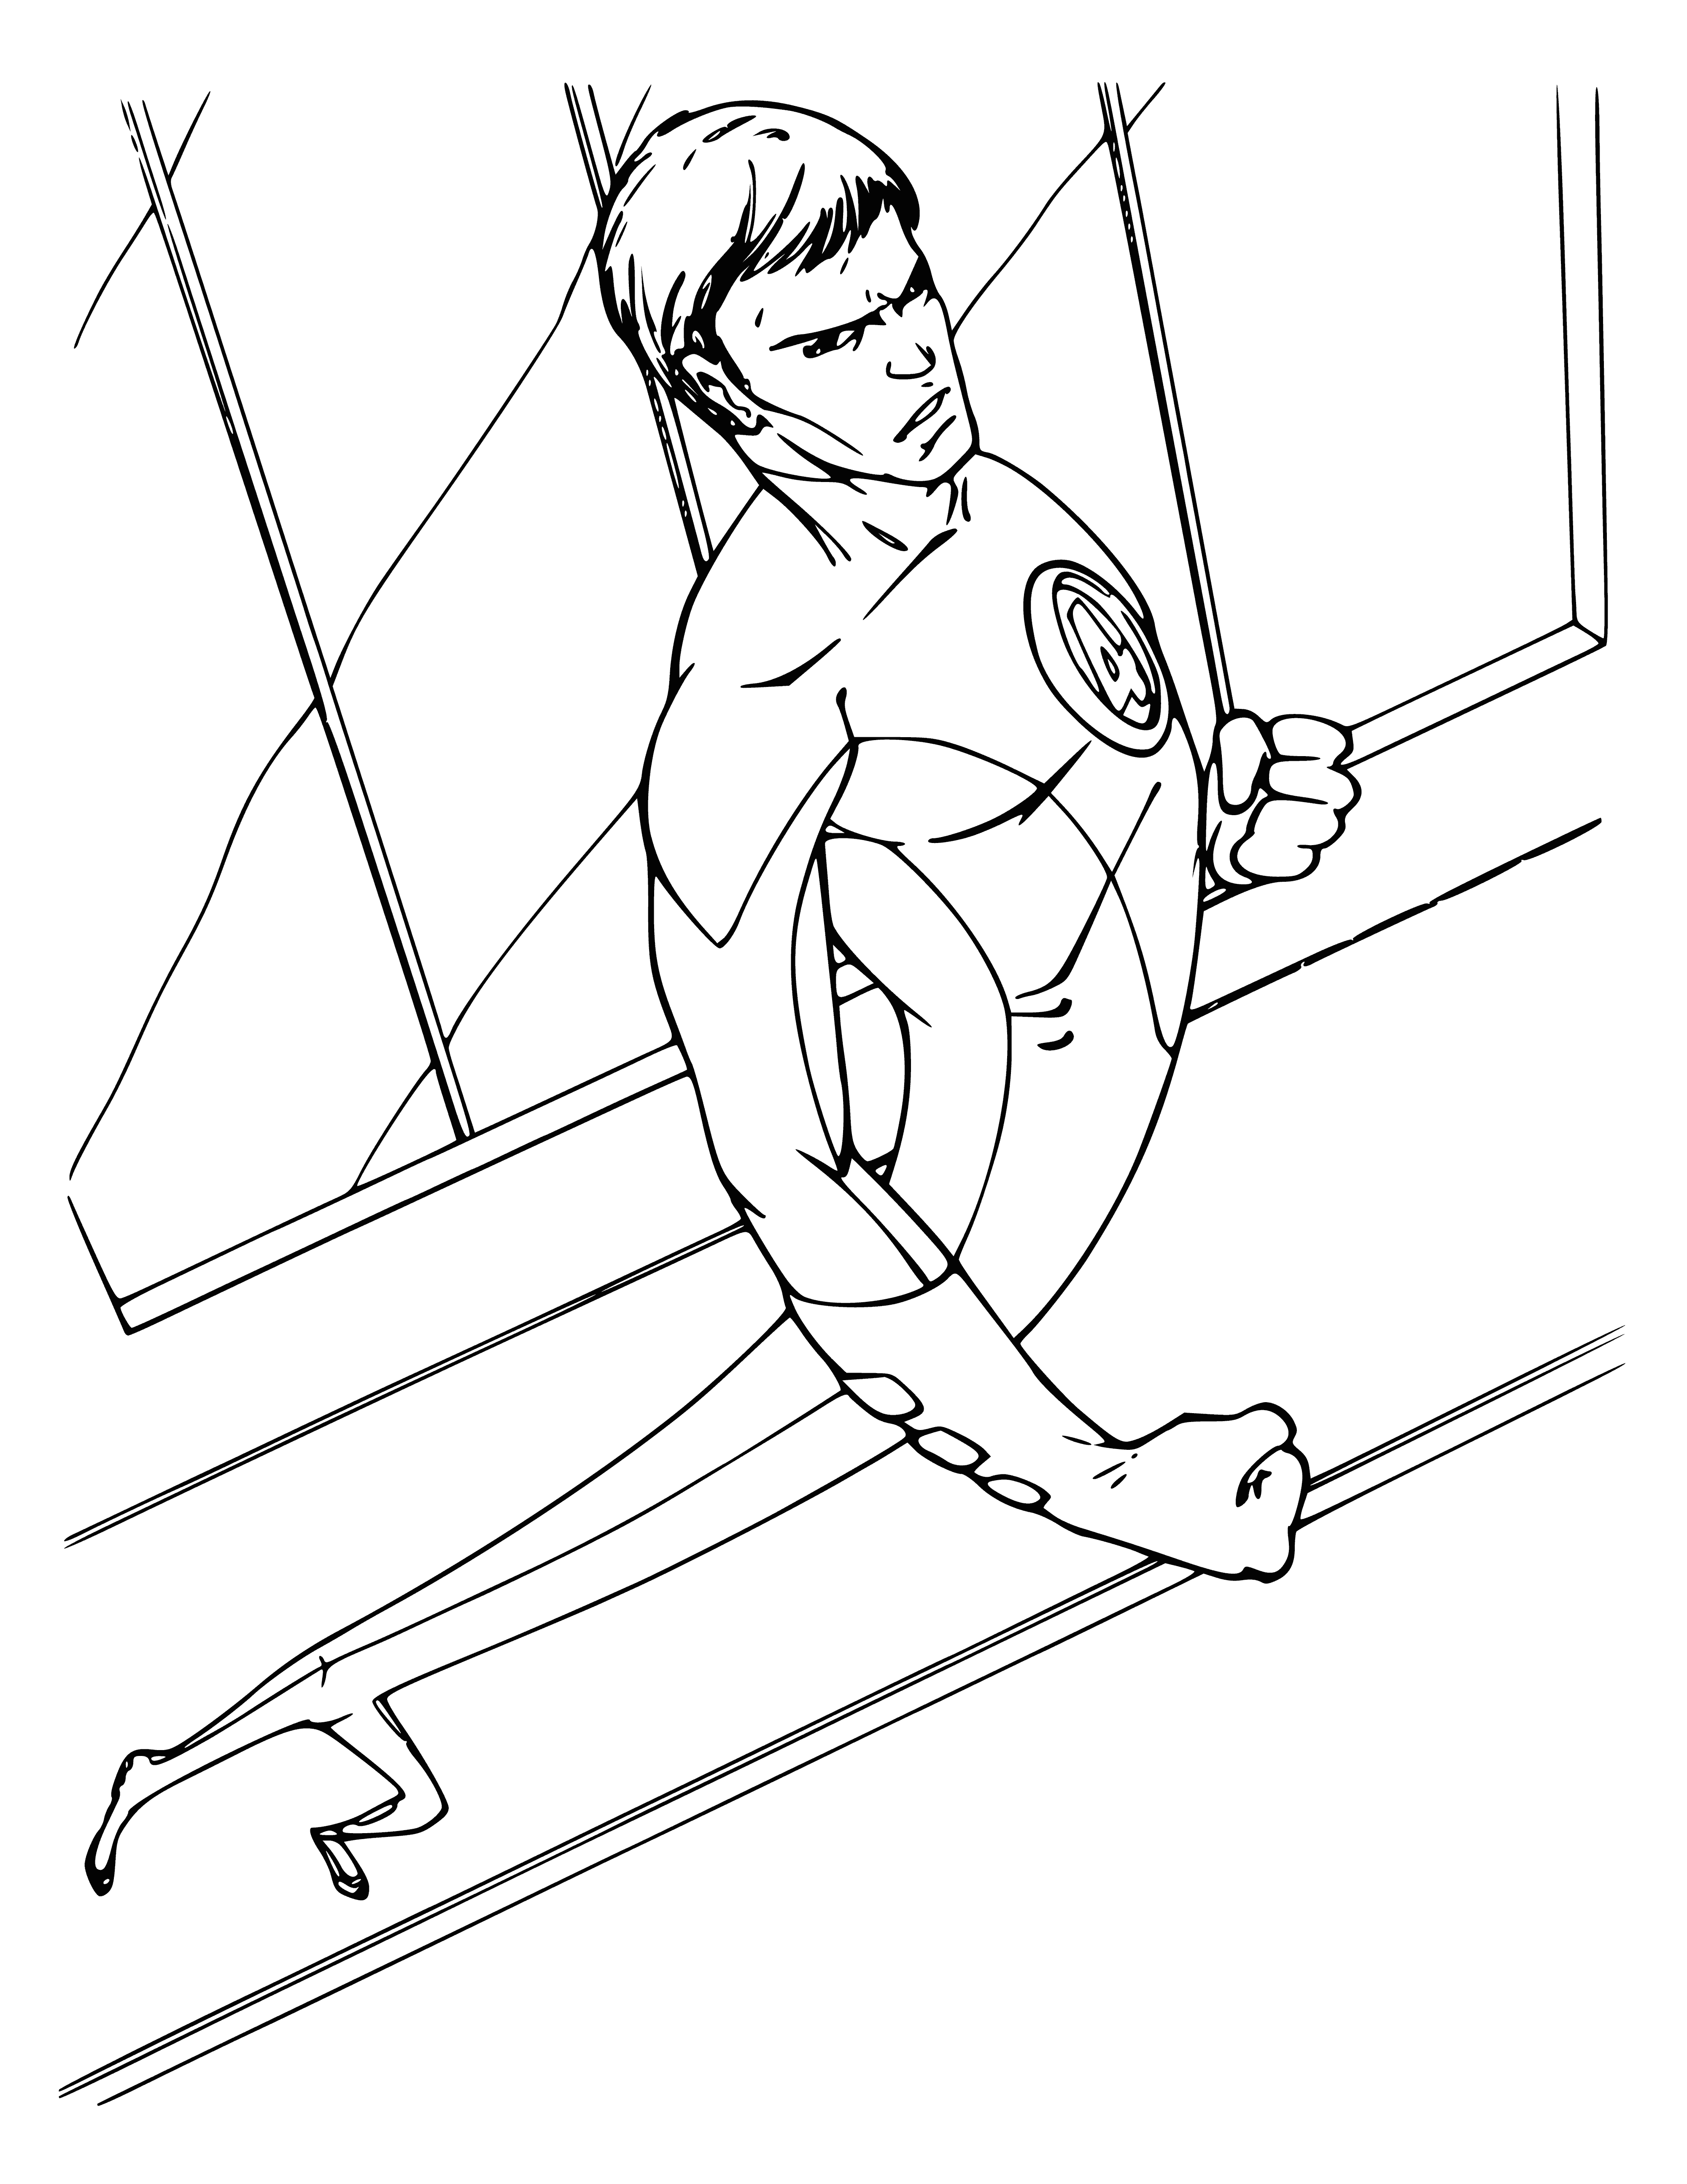 Flexible coloring page